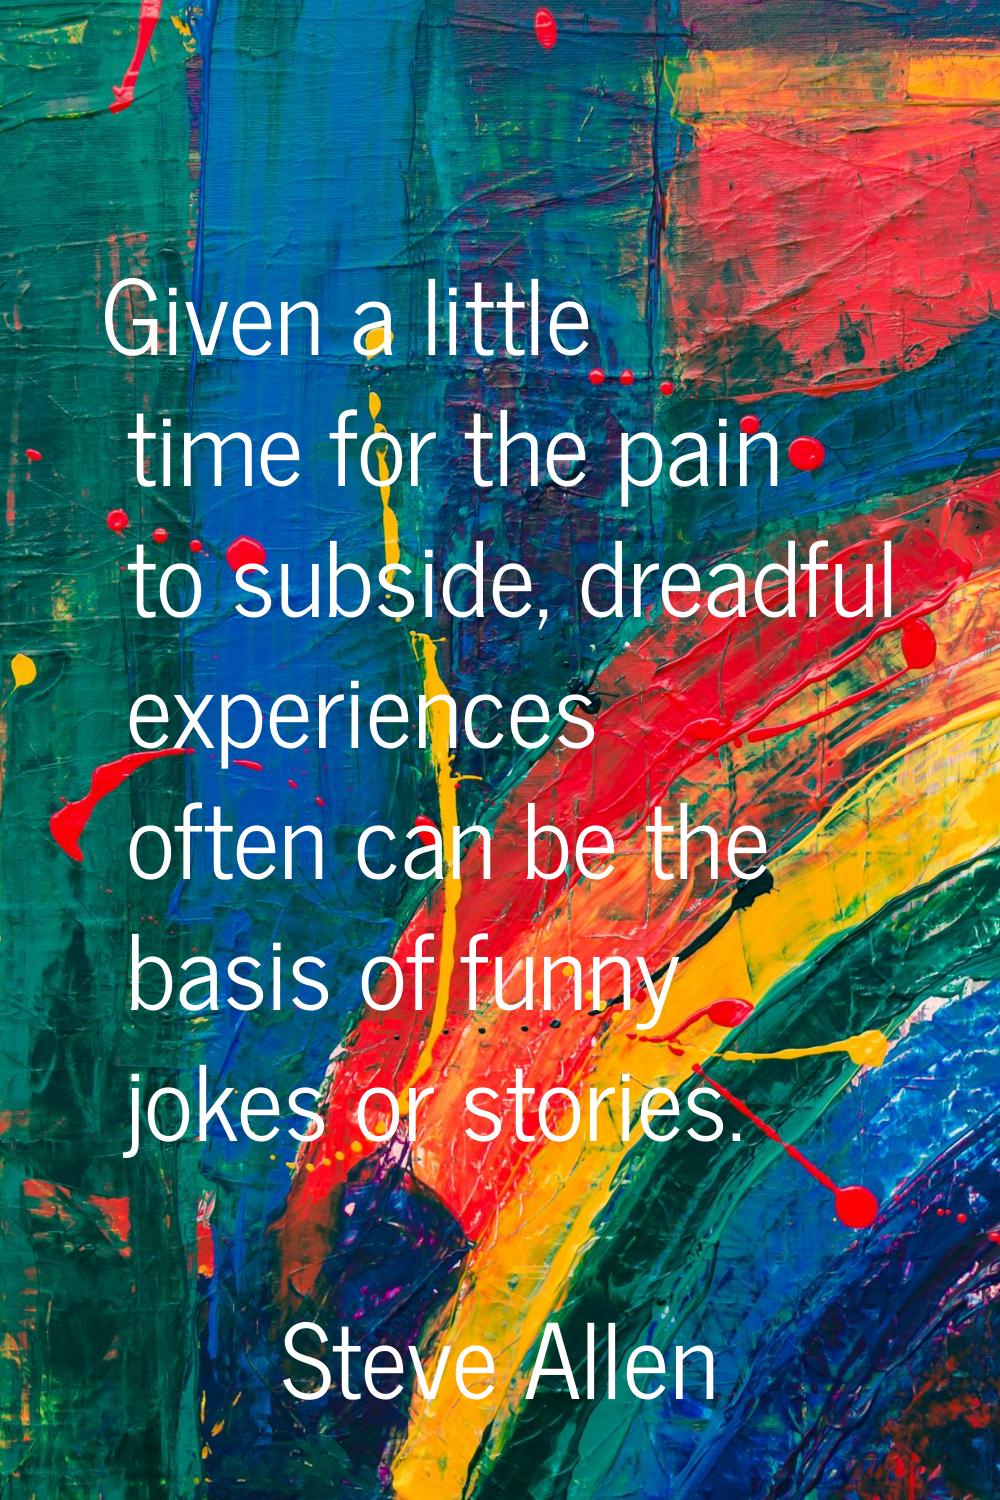 Given a little time for the pain to subside, dreadful experiences often can be the basis of funny j